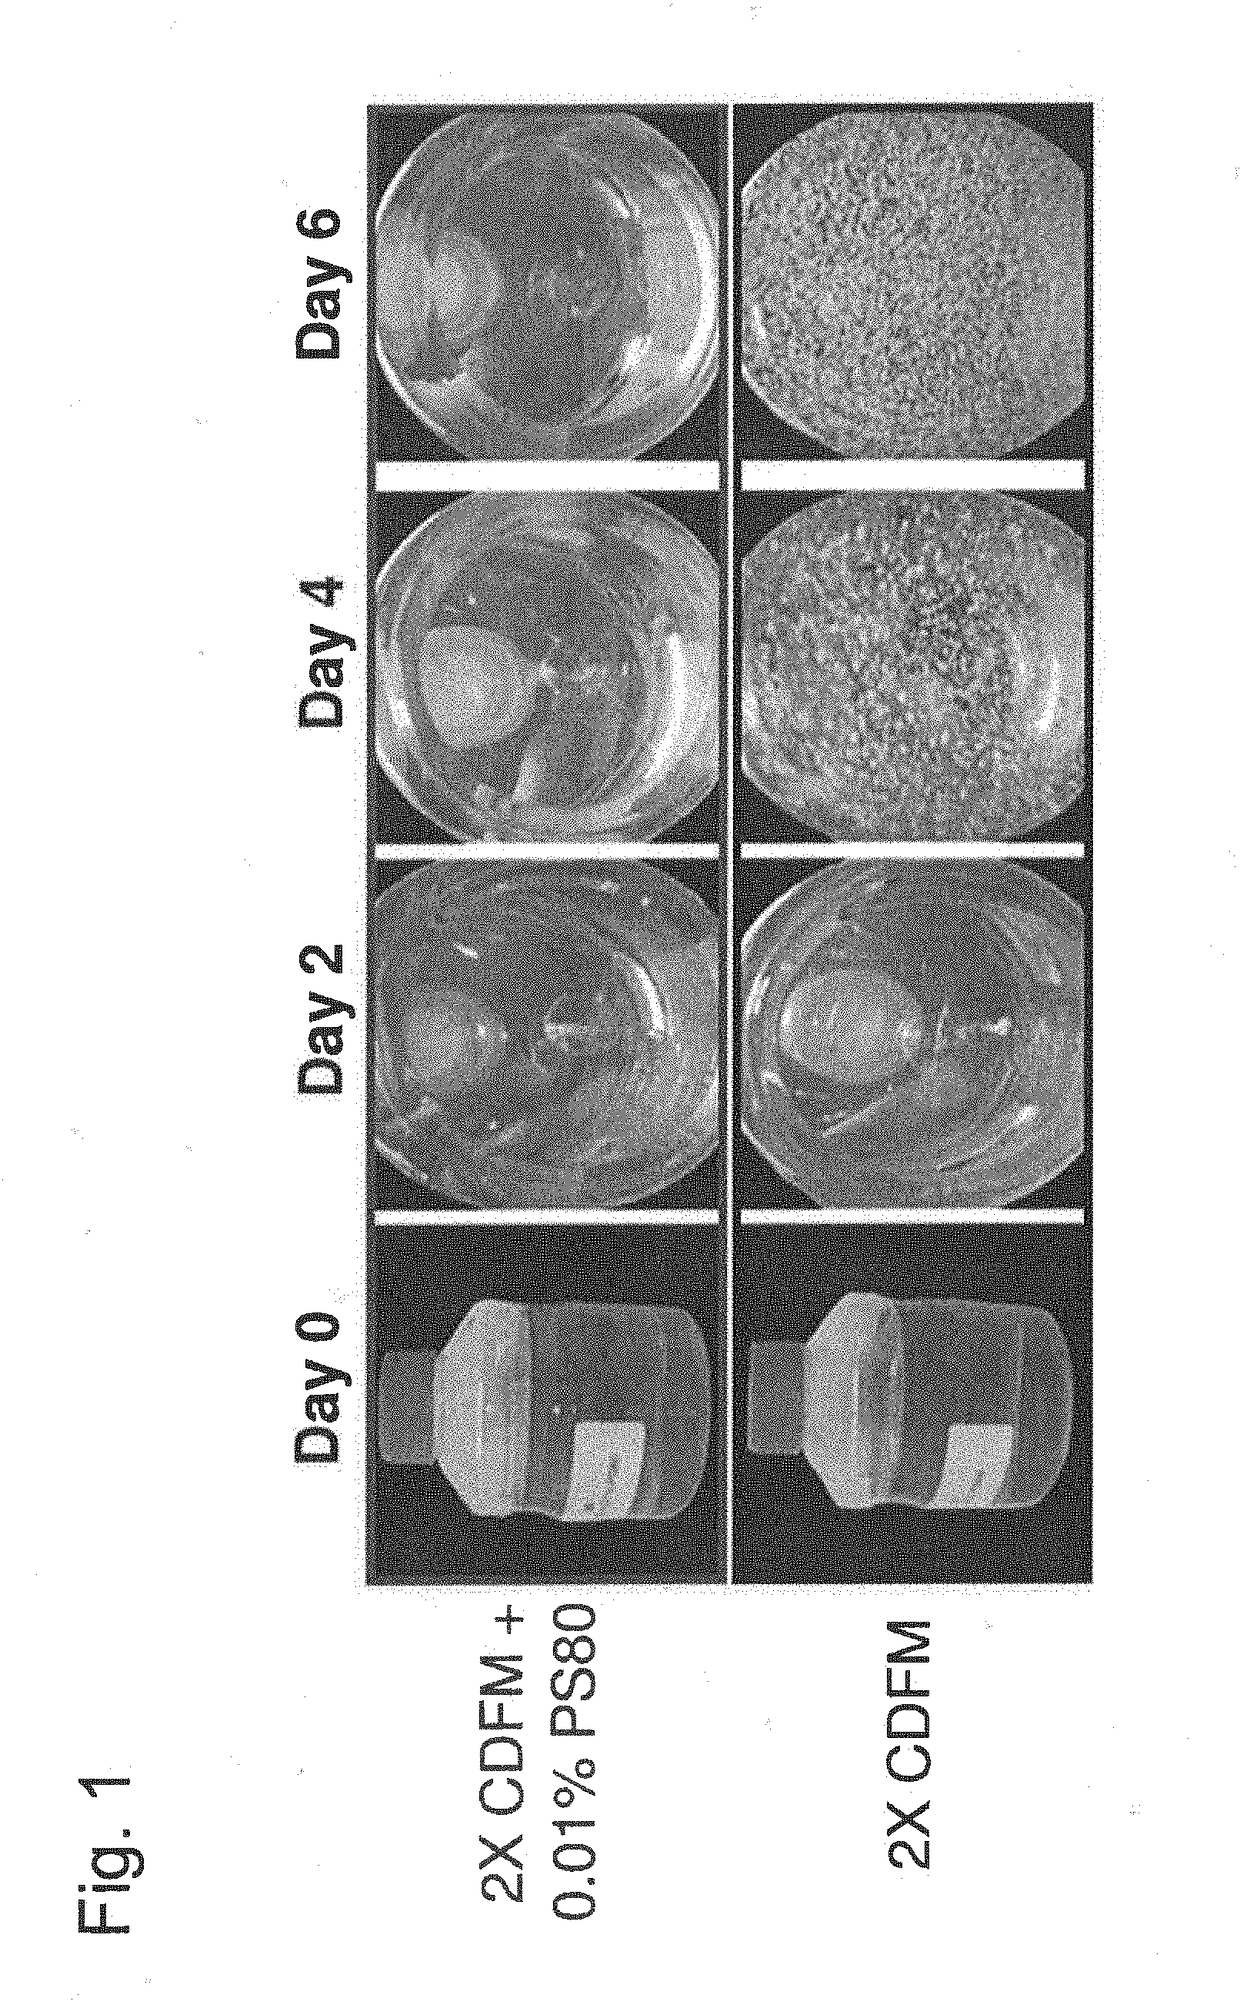 Mammalian cell culture performance through surfactant supplementation of feed media